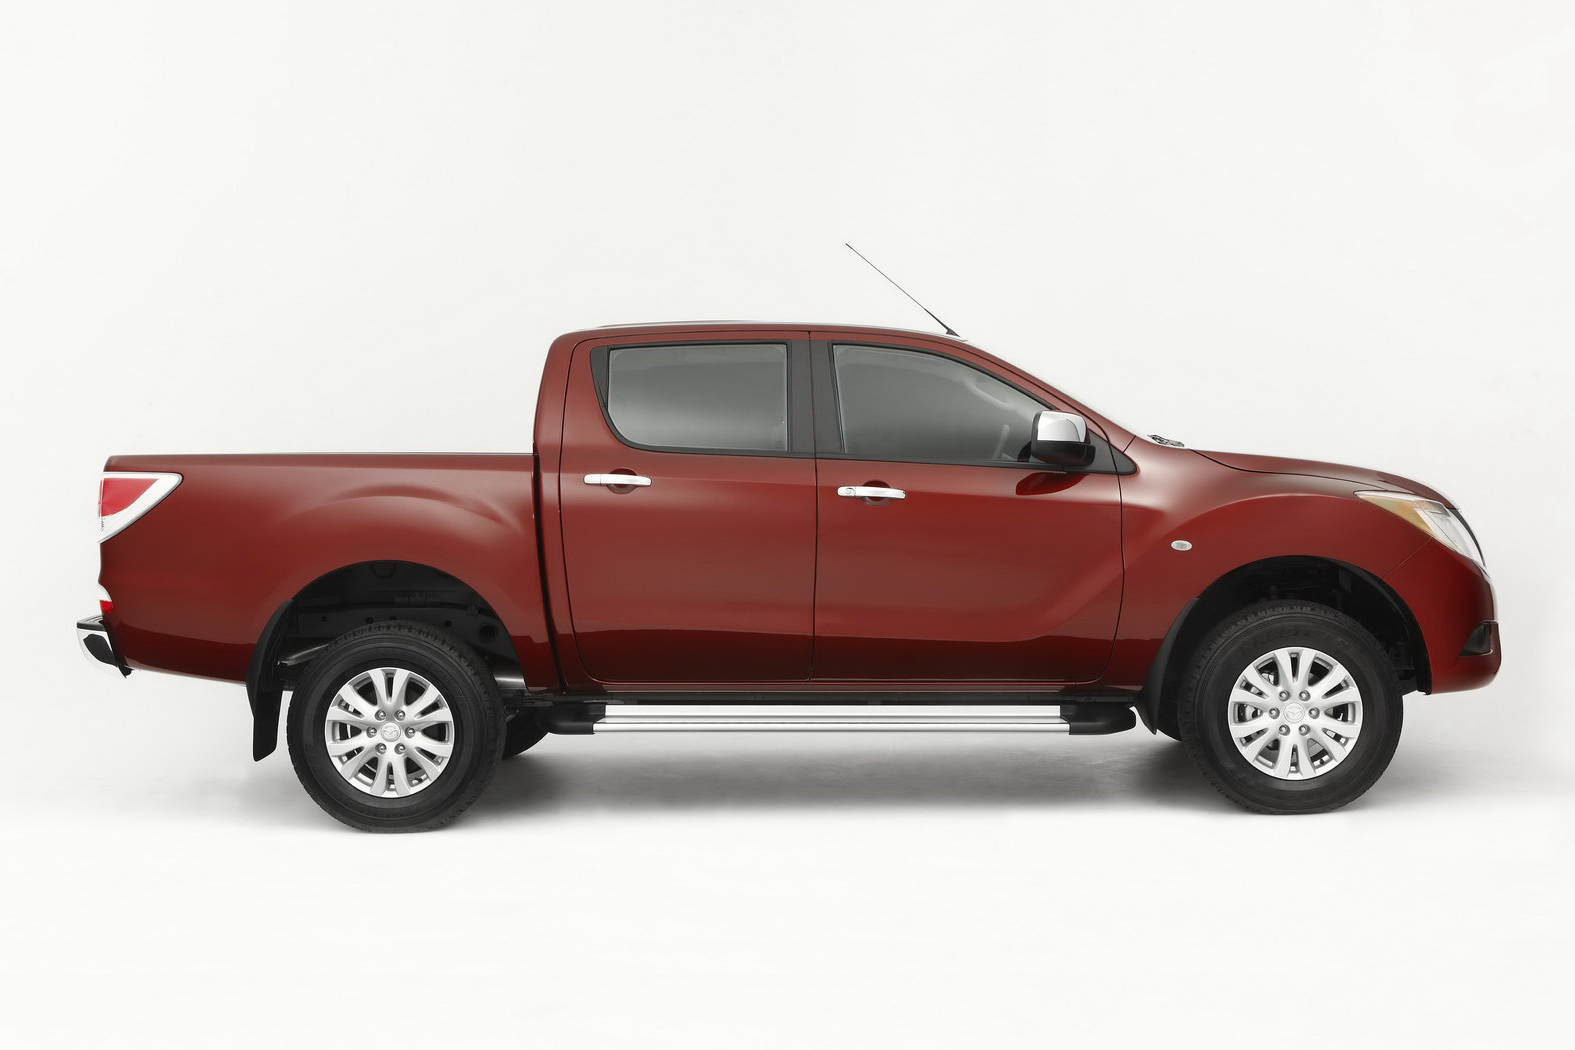 New Mazda BT-50 Pickup Truck: First Photos of Ford Ranger ...